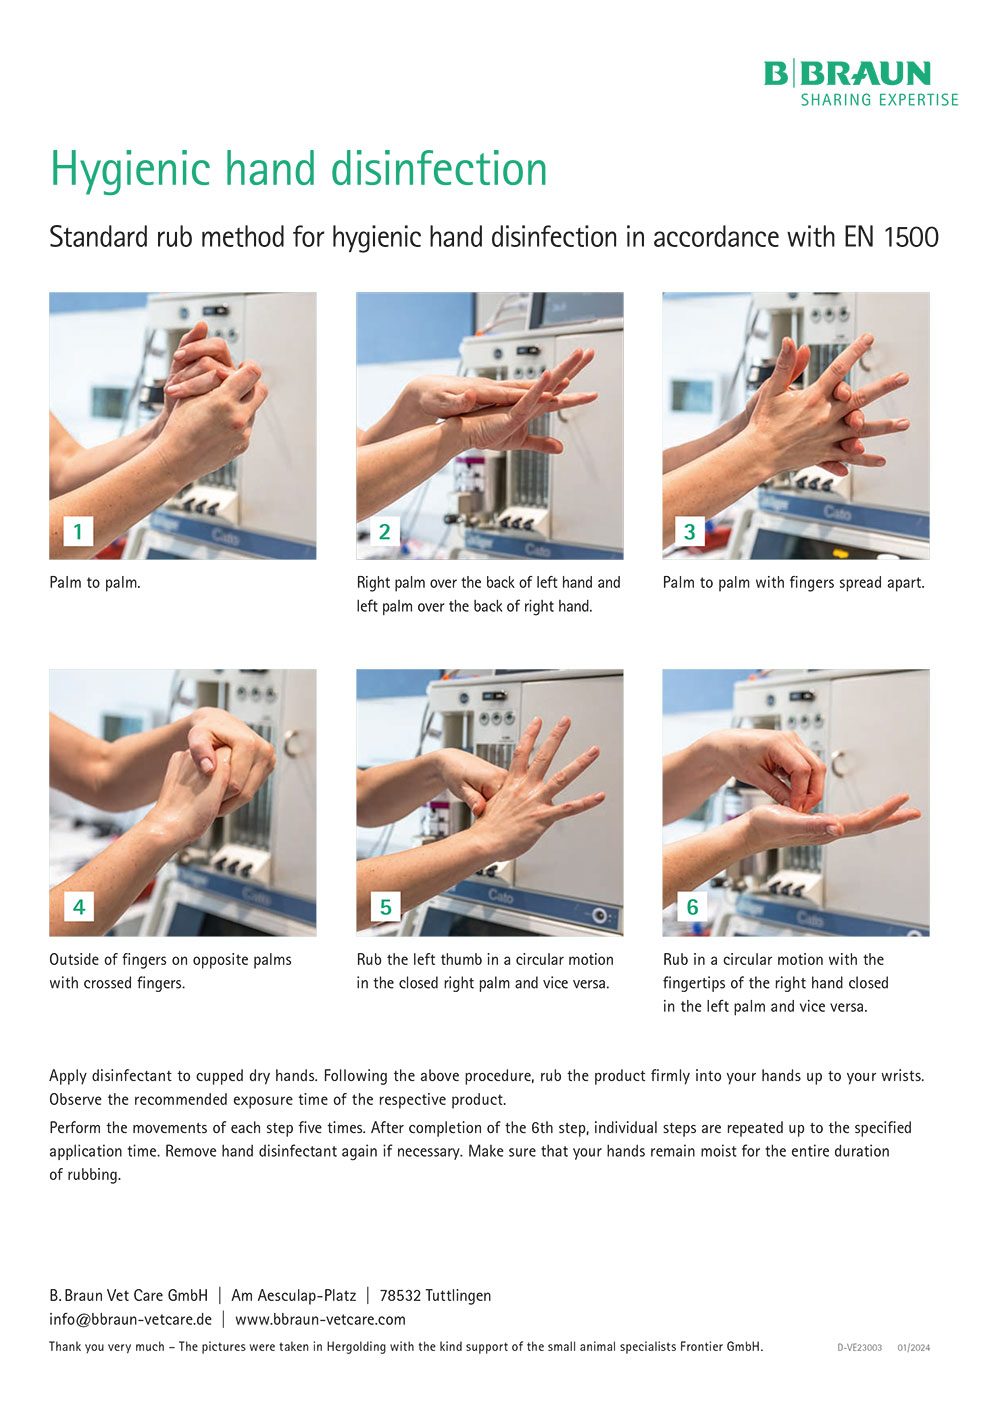 Step-by-step guide: Hygienic hand disinfection